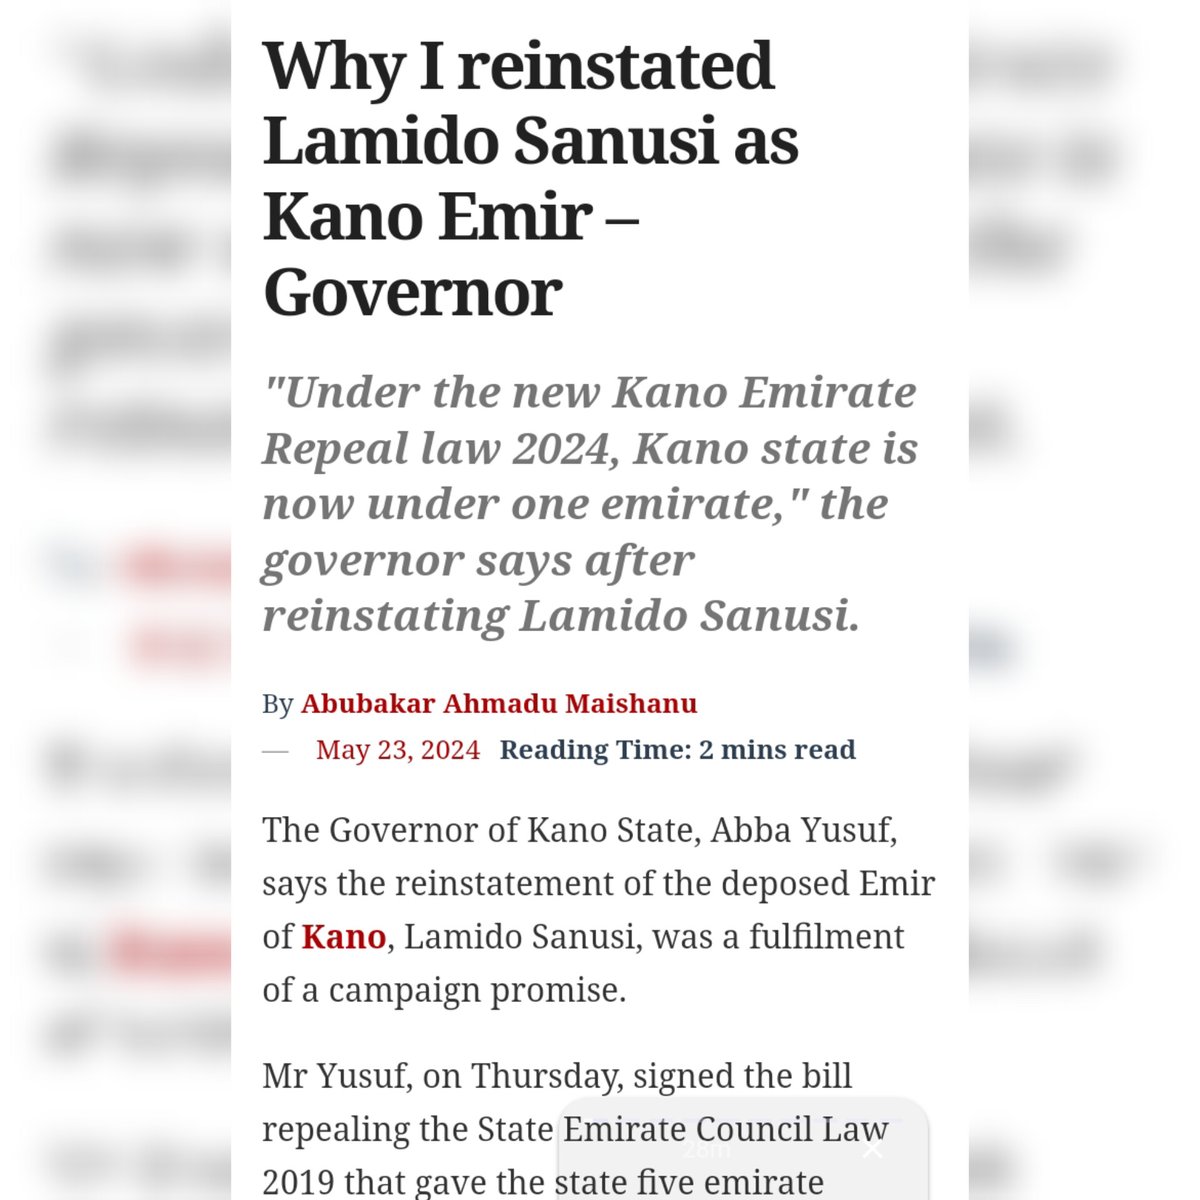 Emir Lamido Sanusi was a victim of dirty power play by Gandollars. However, patience conquers every adversity.